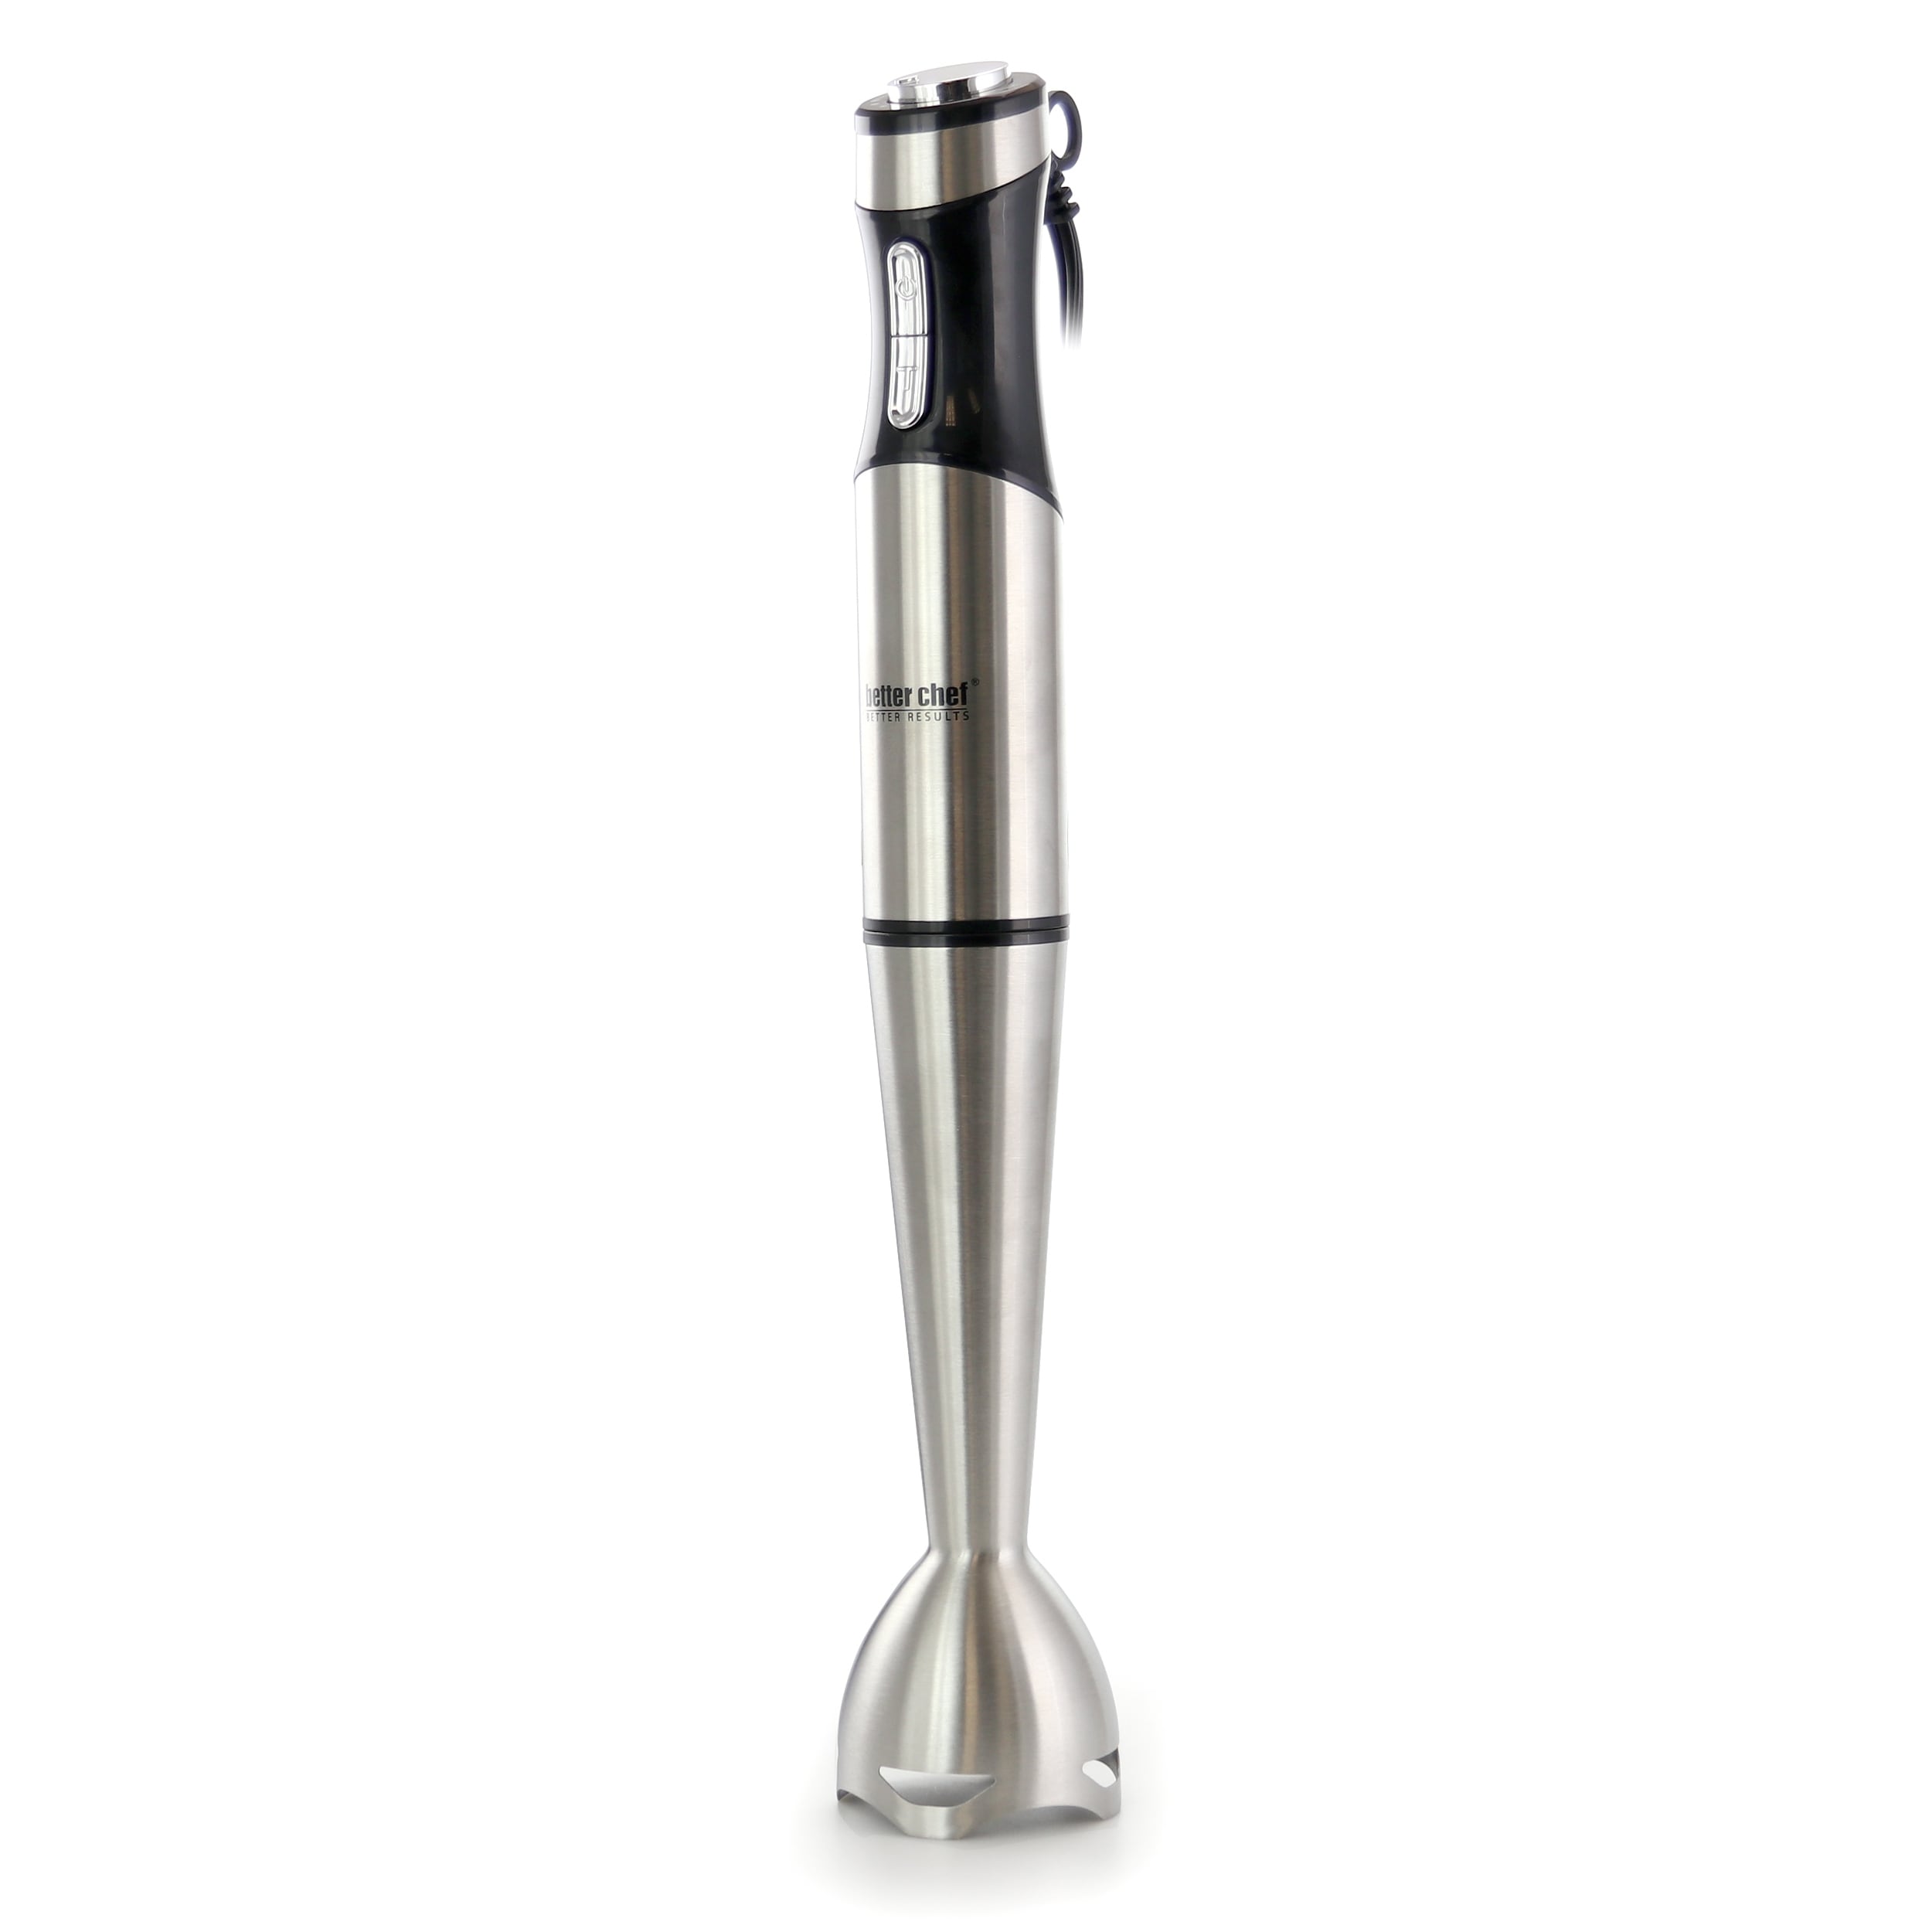 CHEFX 5-in-1 Immersion Blender - 9 Speed Ultra Powerful Stainless